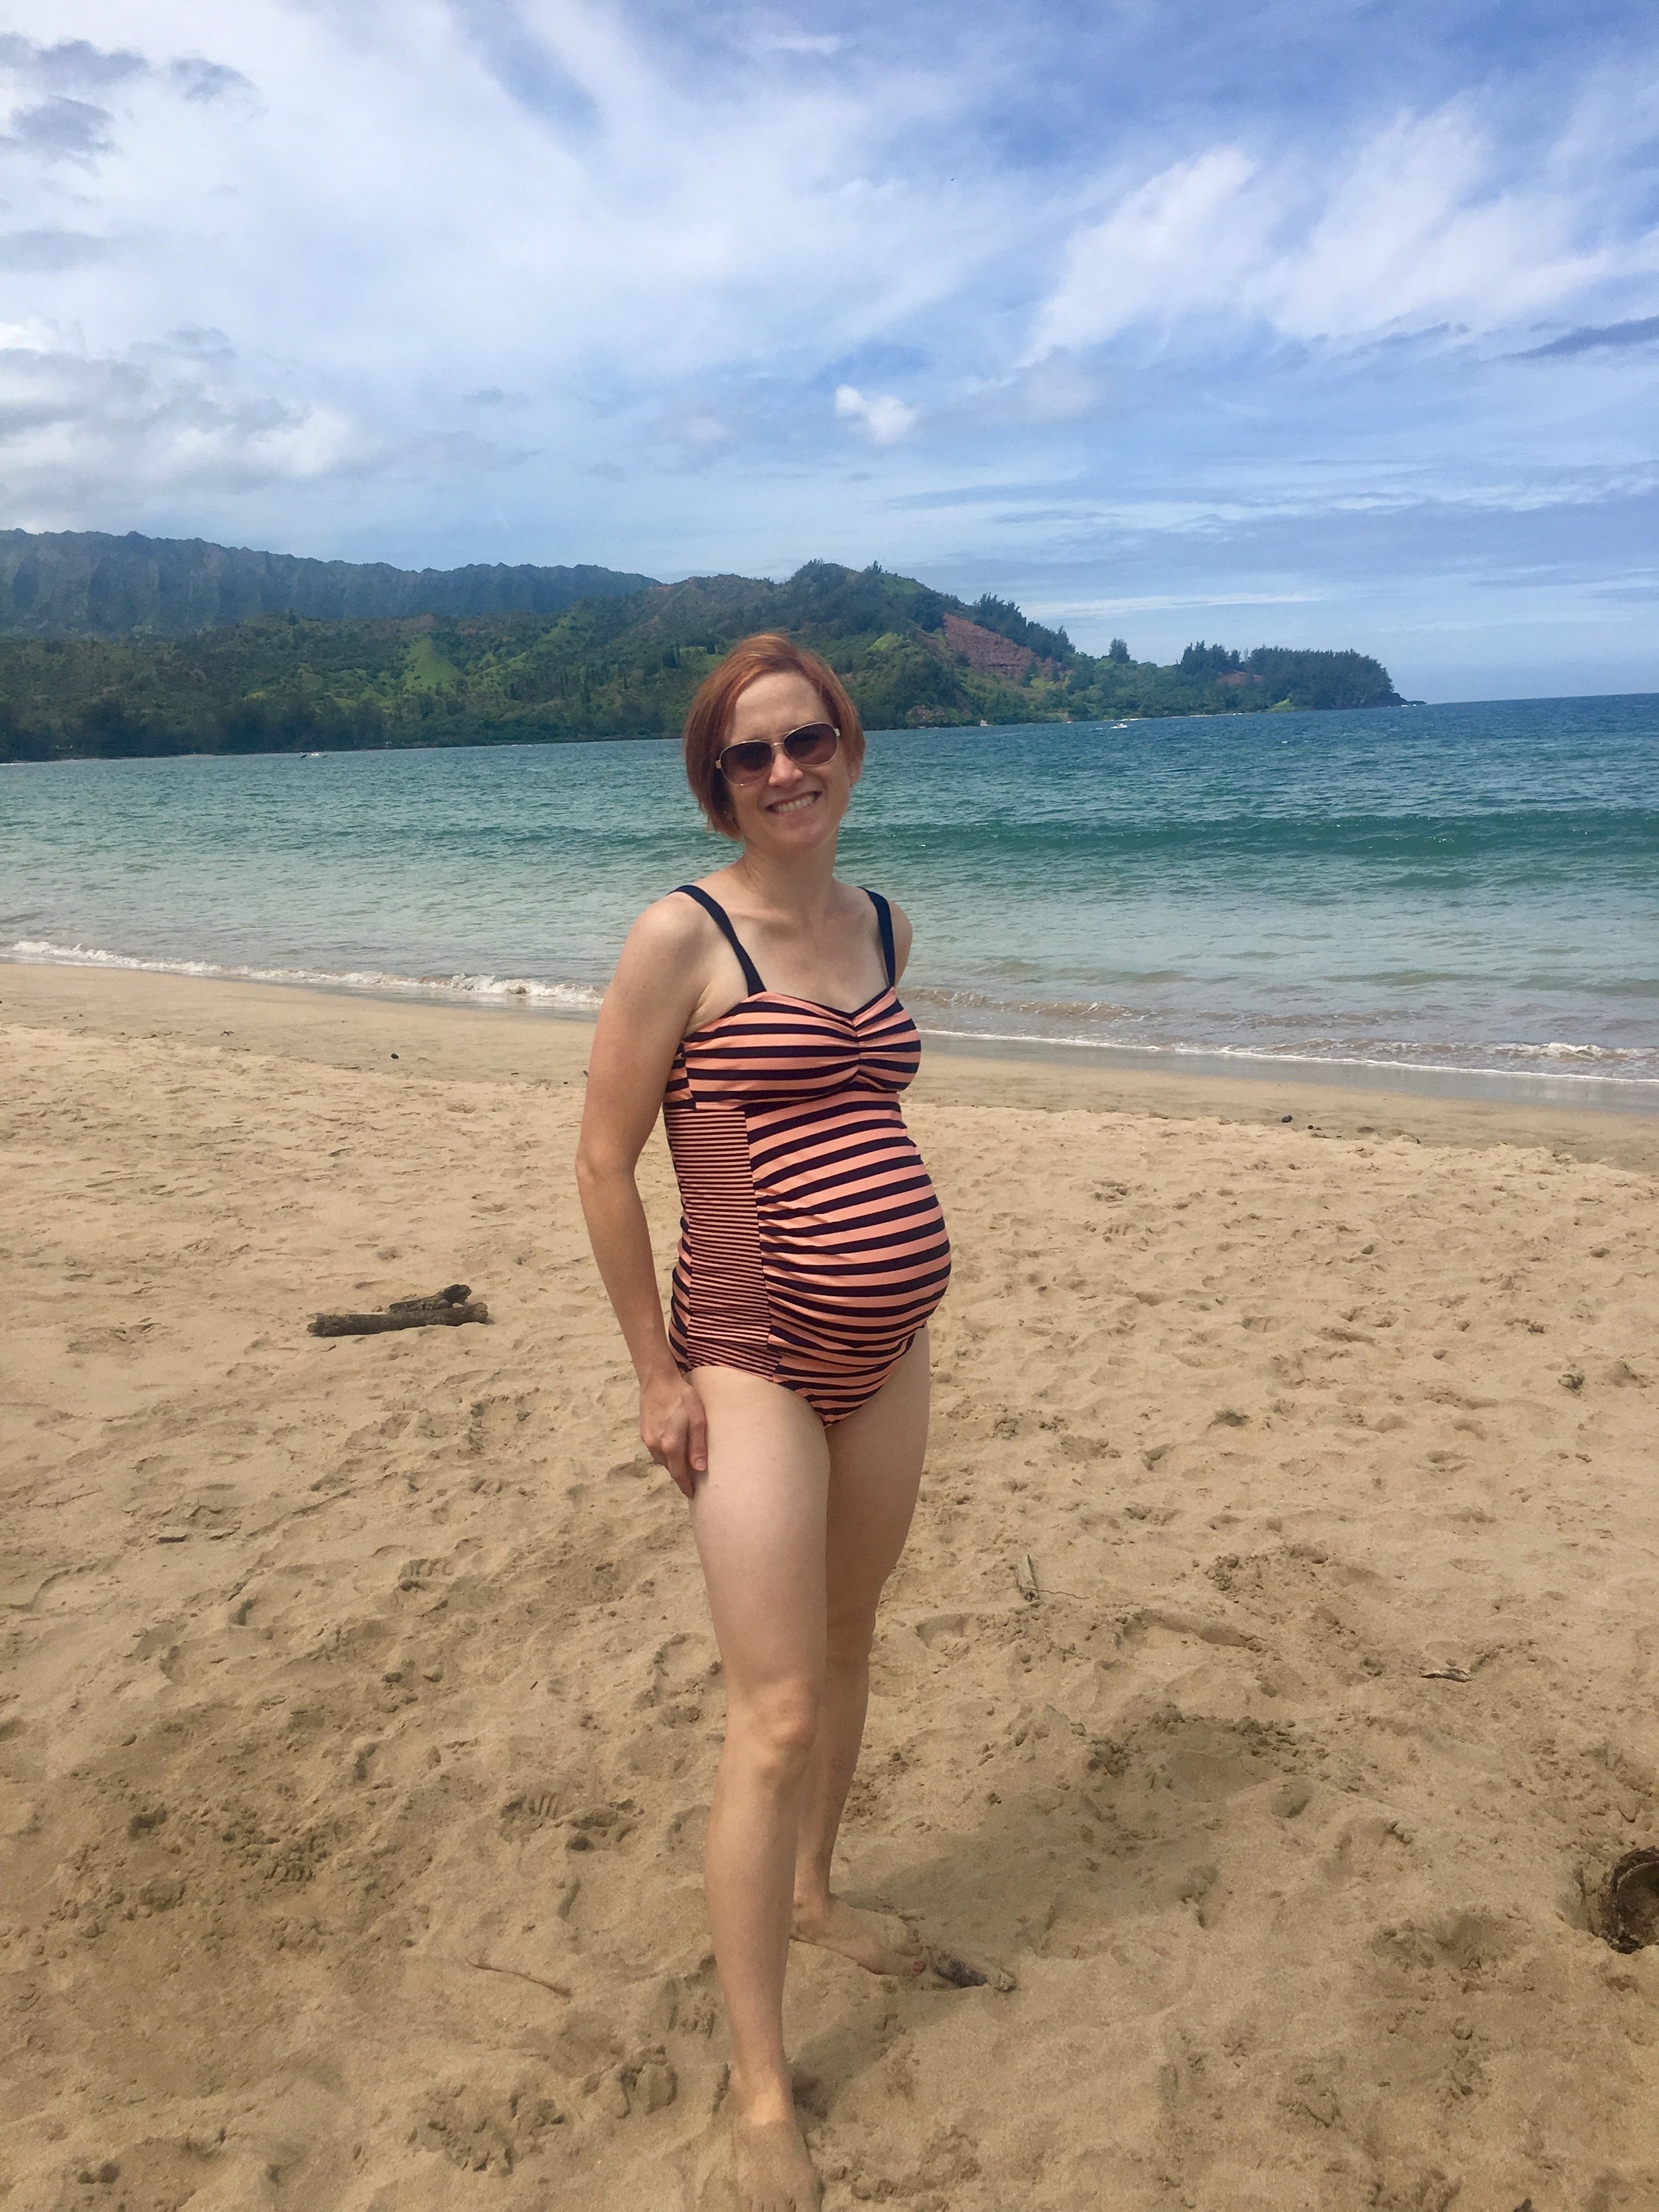 30 Weeks Pregnant and at the Beach